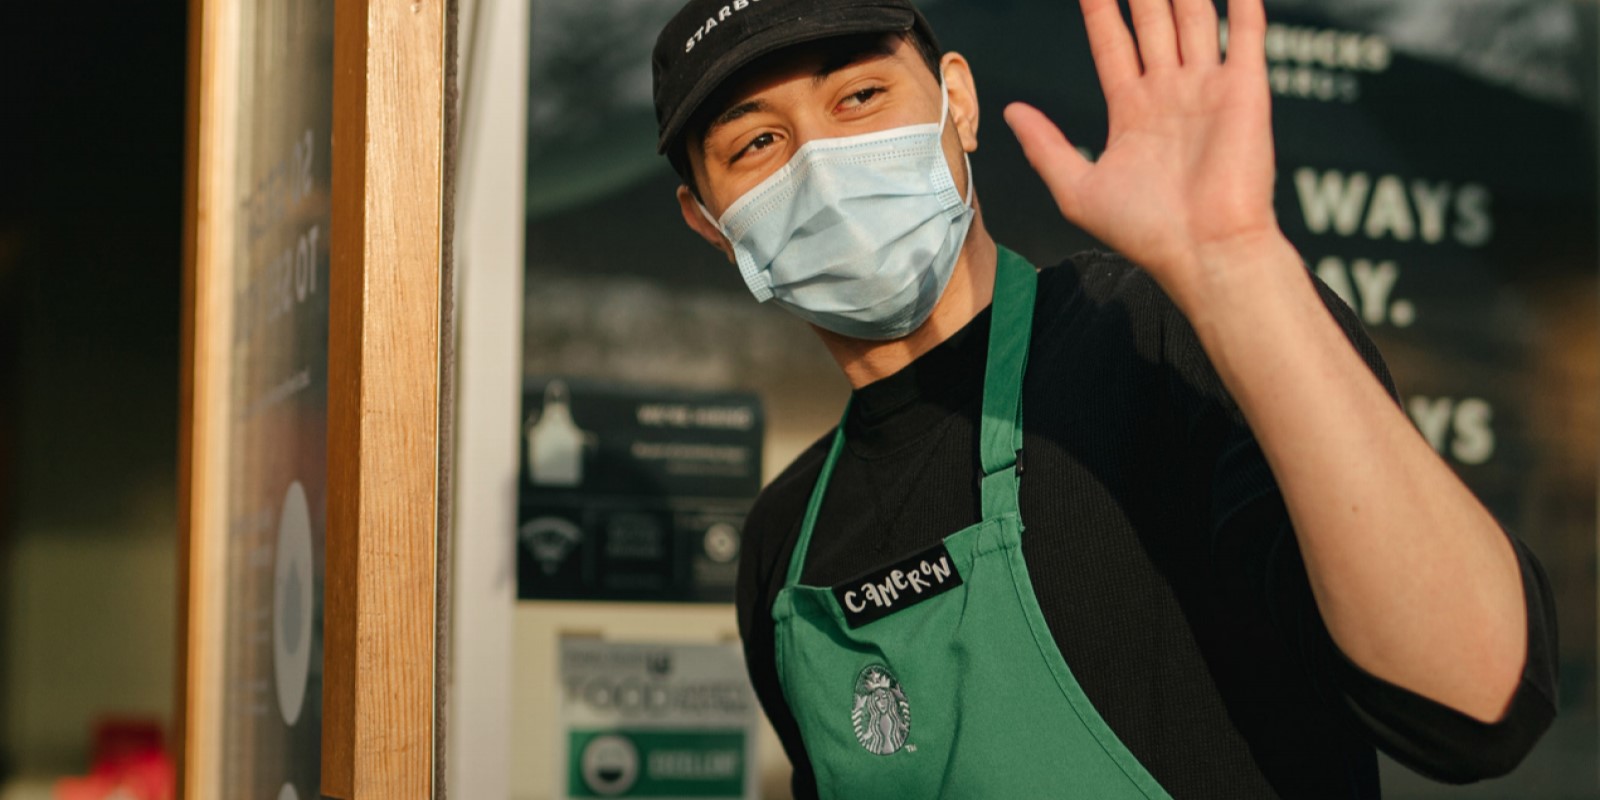 Starbucks barista with a mask opening door and waving